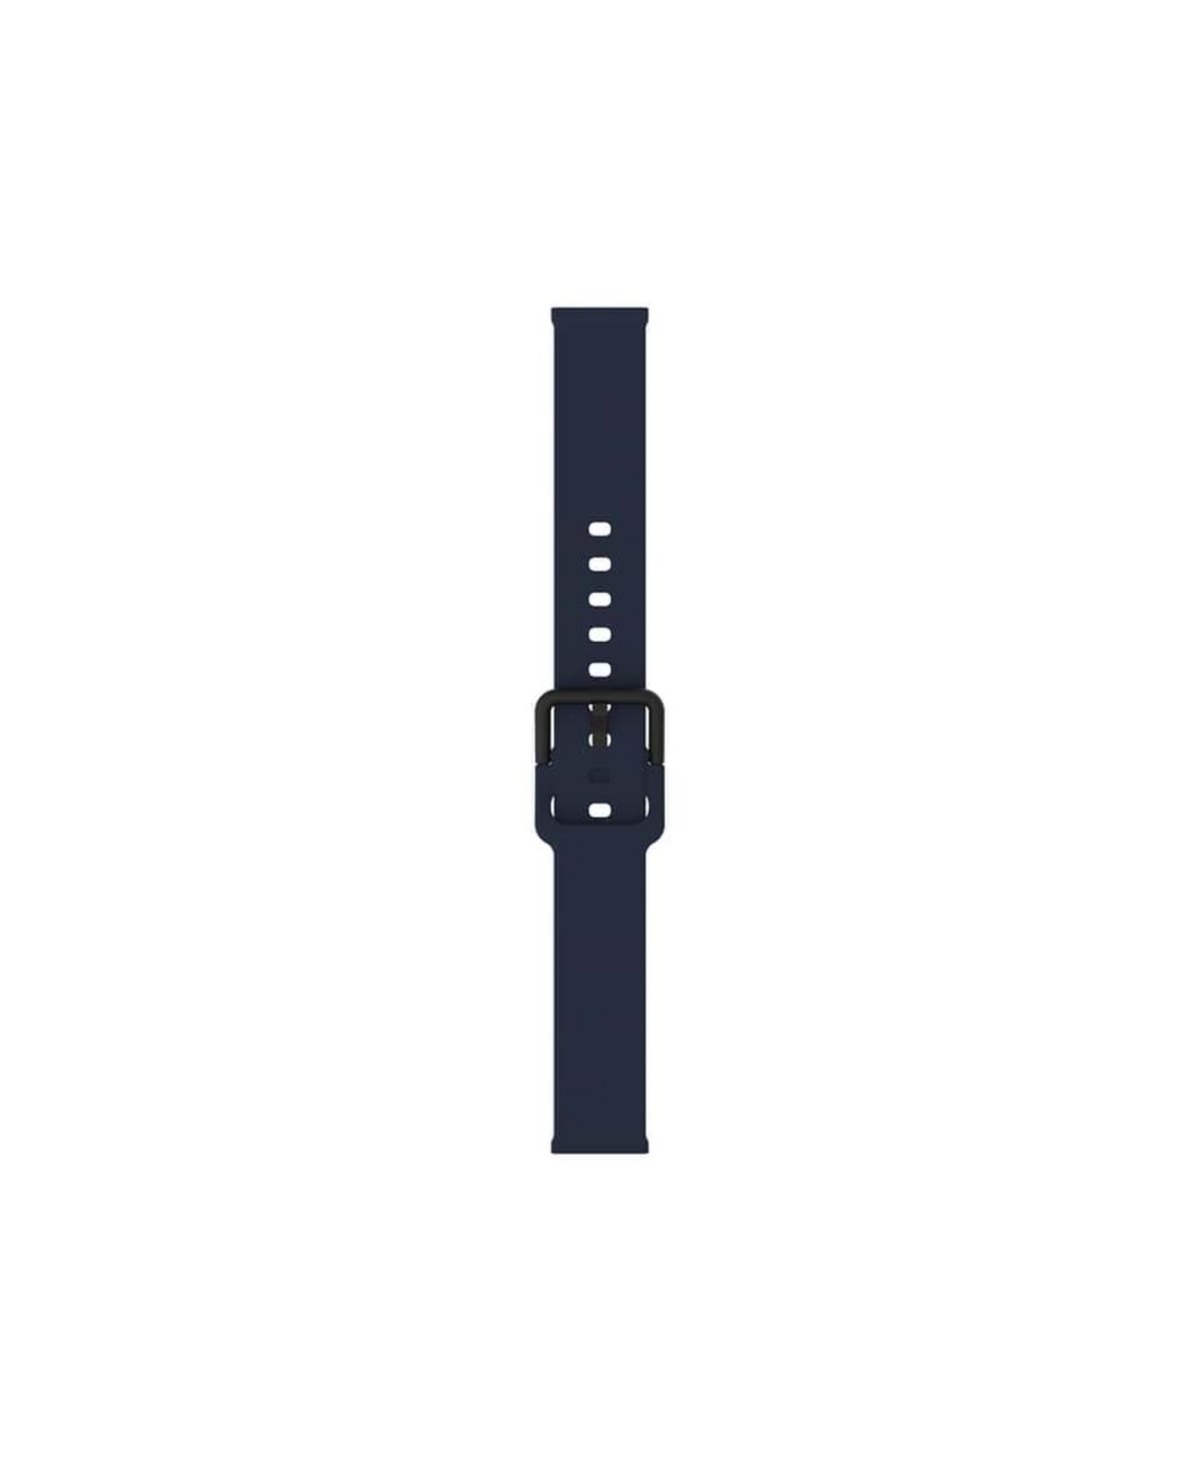 Air 3 Unisex Blue, Black Silicone Extra Interchangeable Strap for iTouch Air 3 44 Mm - Blue/Black Silicone